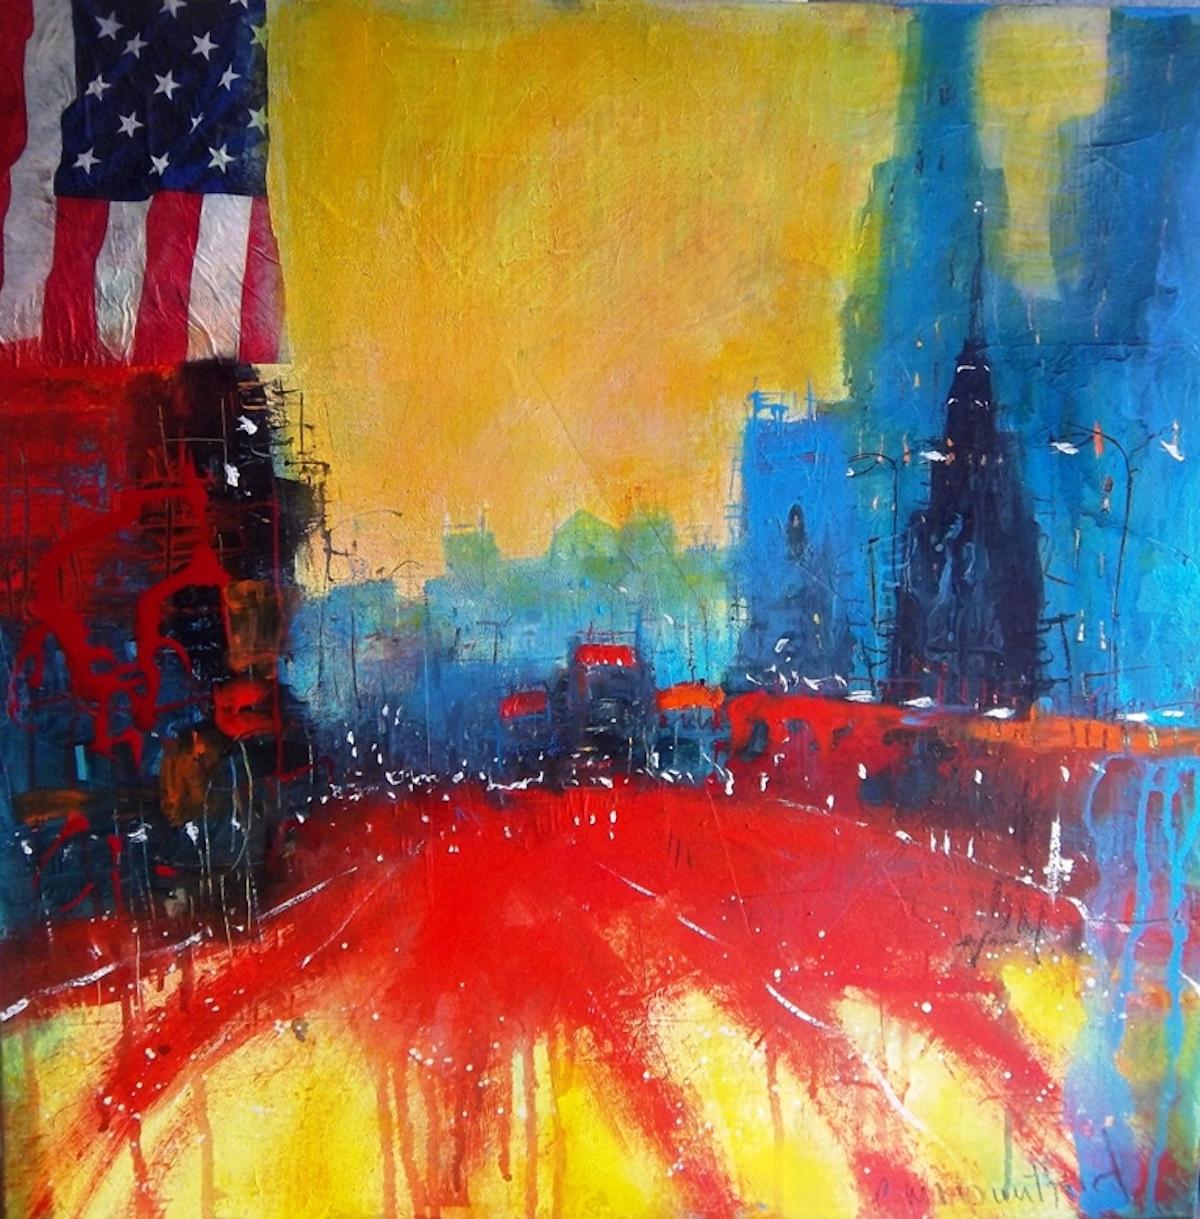 Carol Mountford New York Night [2022]
original and hand signed by the artist 
acrylic paint and collage on canvas
Image size: H:50 cm x W:50 cm
Complete Size of Unframed Work: H:50 cm x W:50 cm x D:5cm
Sold Unframed
Please note that insitu images